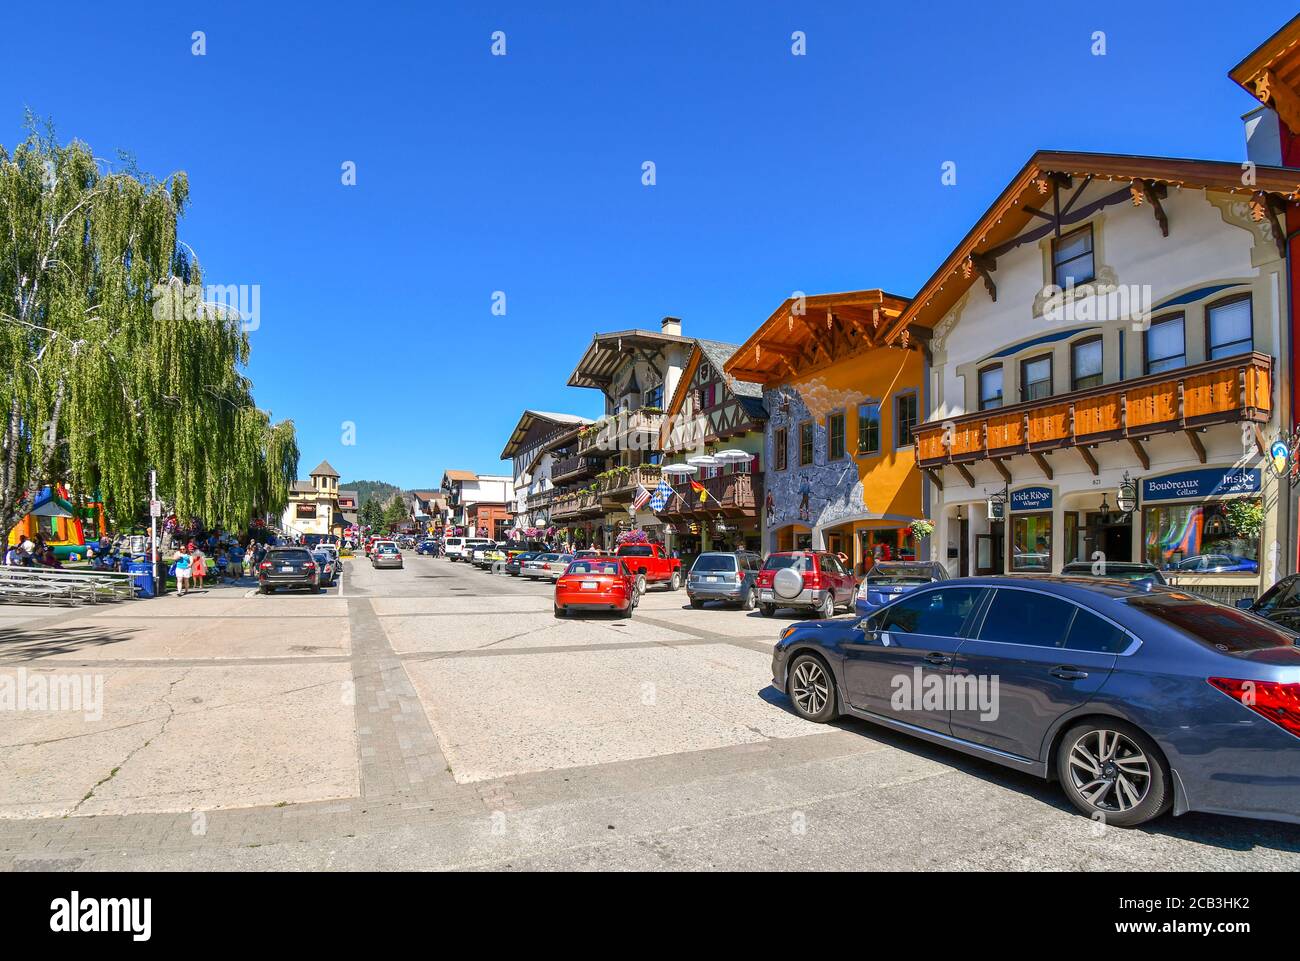 Cars and tourists fill the main street through the Bavarian themed town of Leavenworth, Washington, United States. Stock Photo